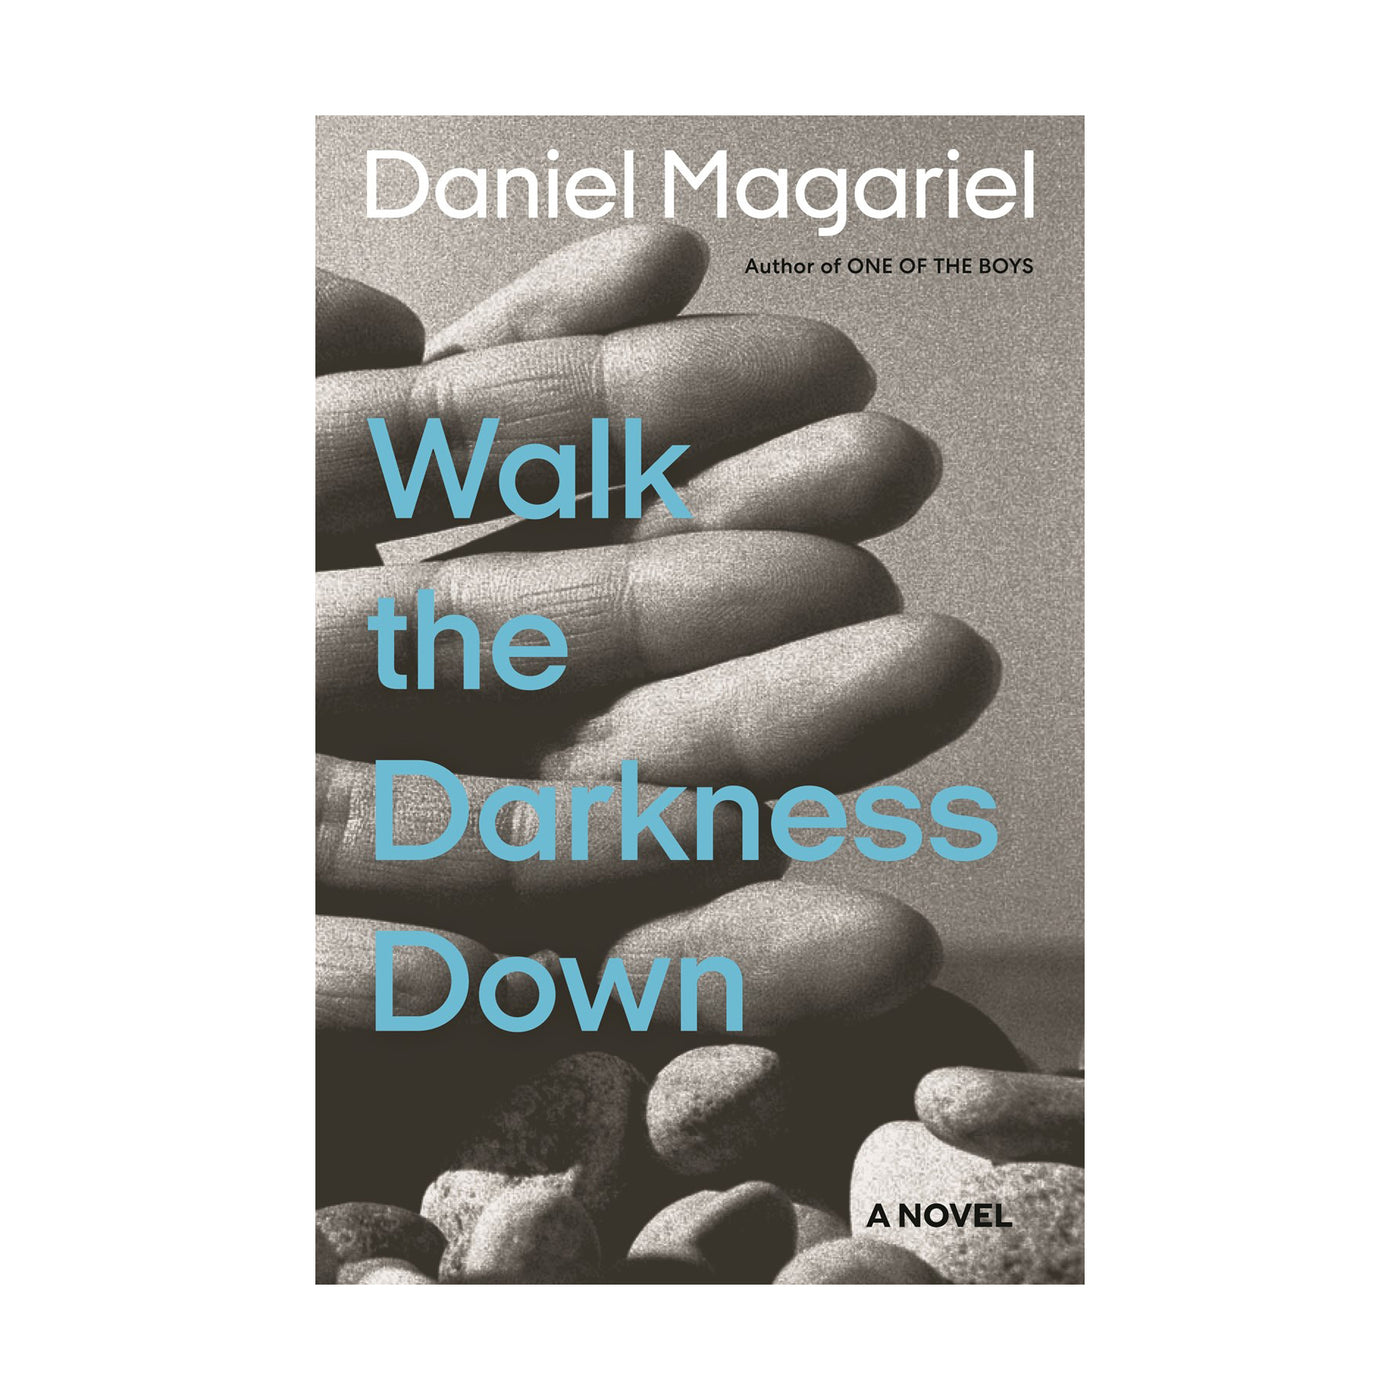 Walk the Darkness Down - Signed